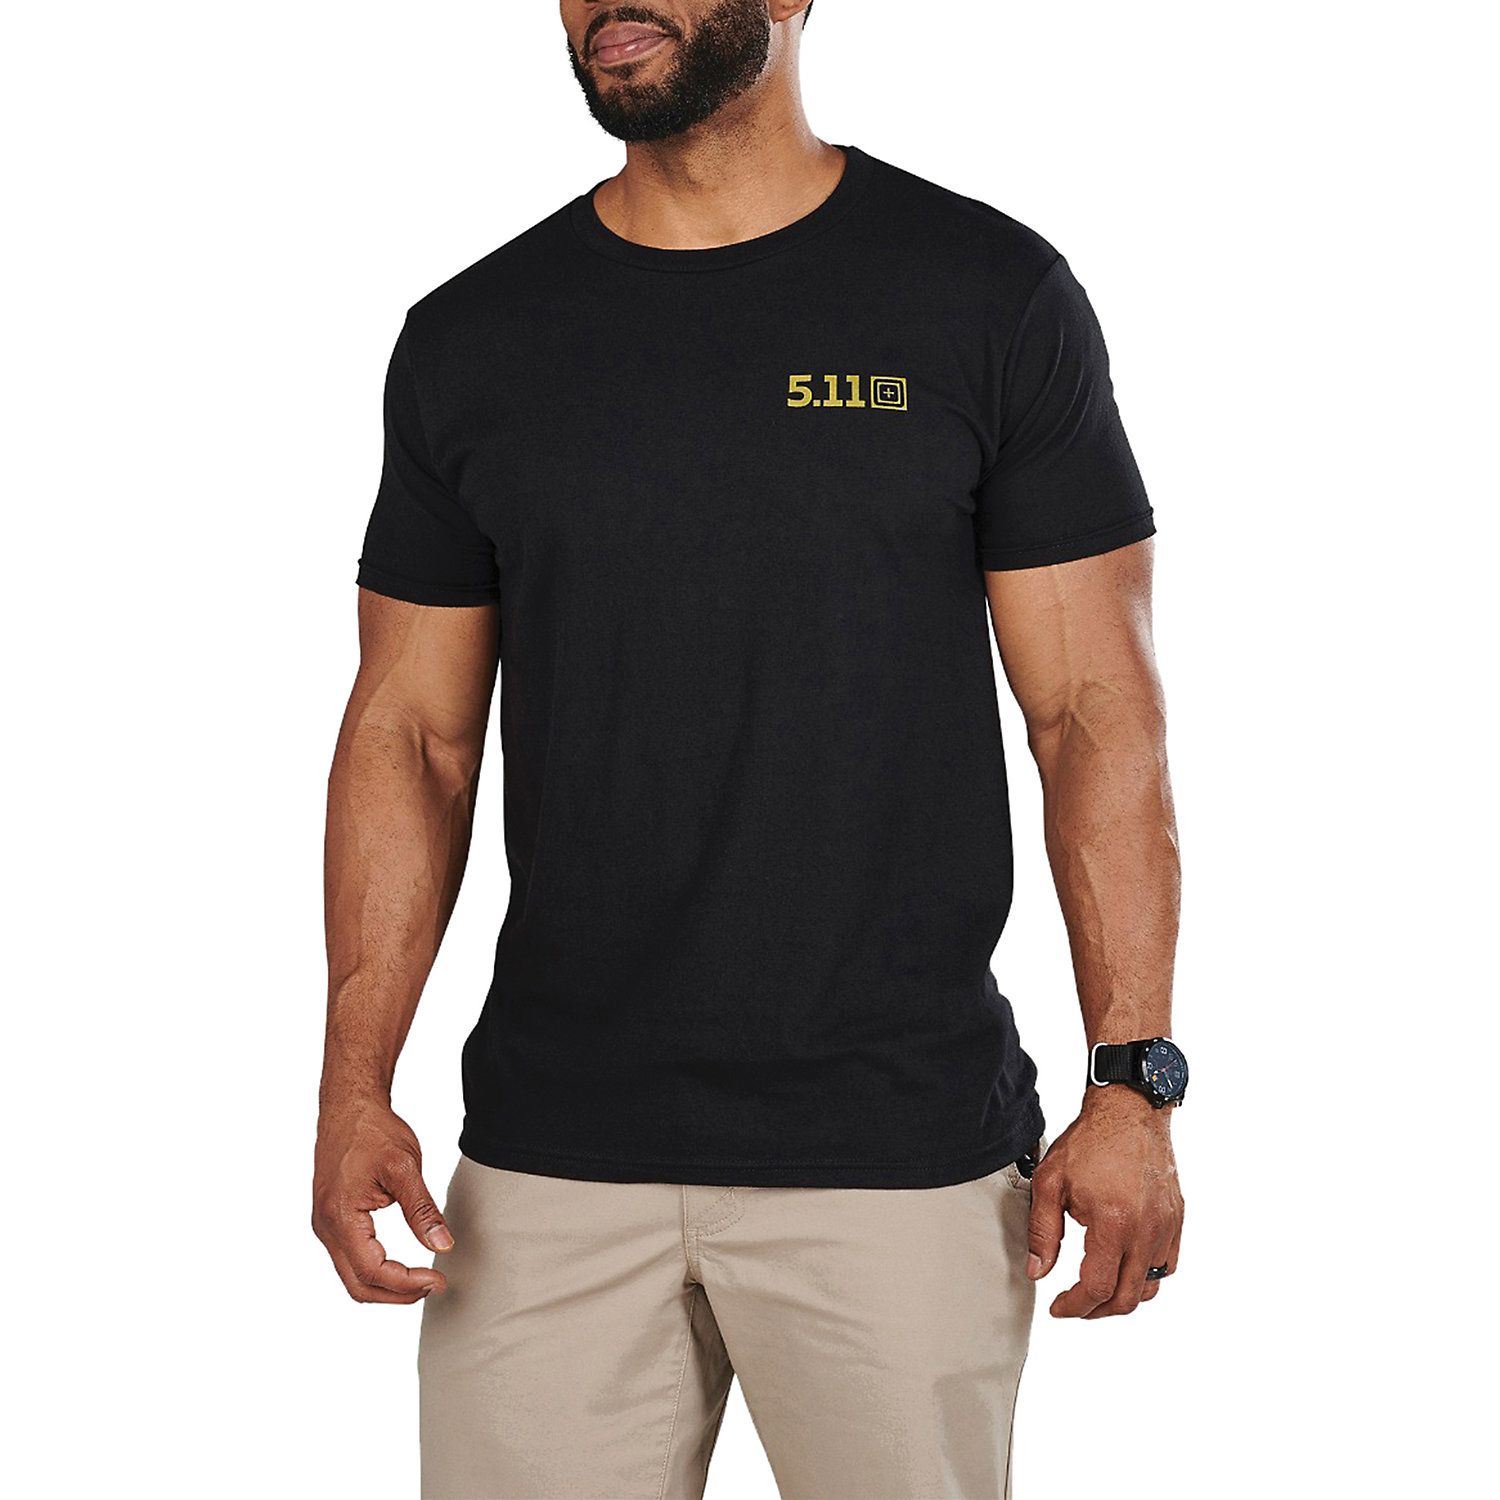 5.11 Mens Brewing Up Victory SS Tee